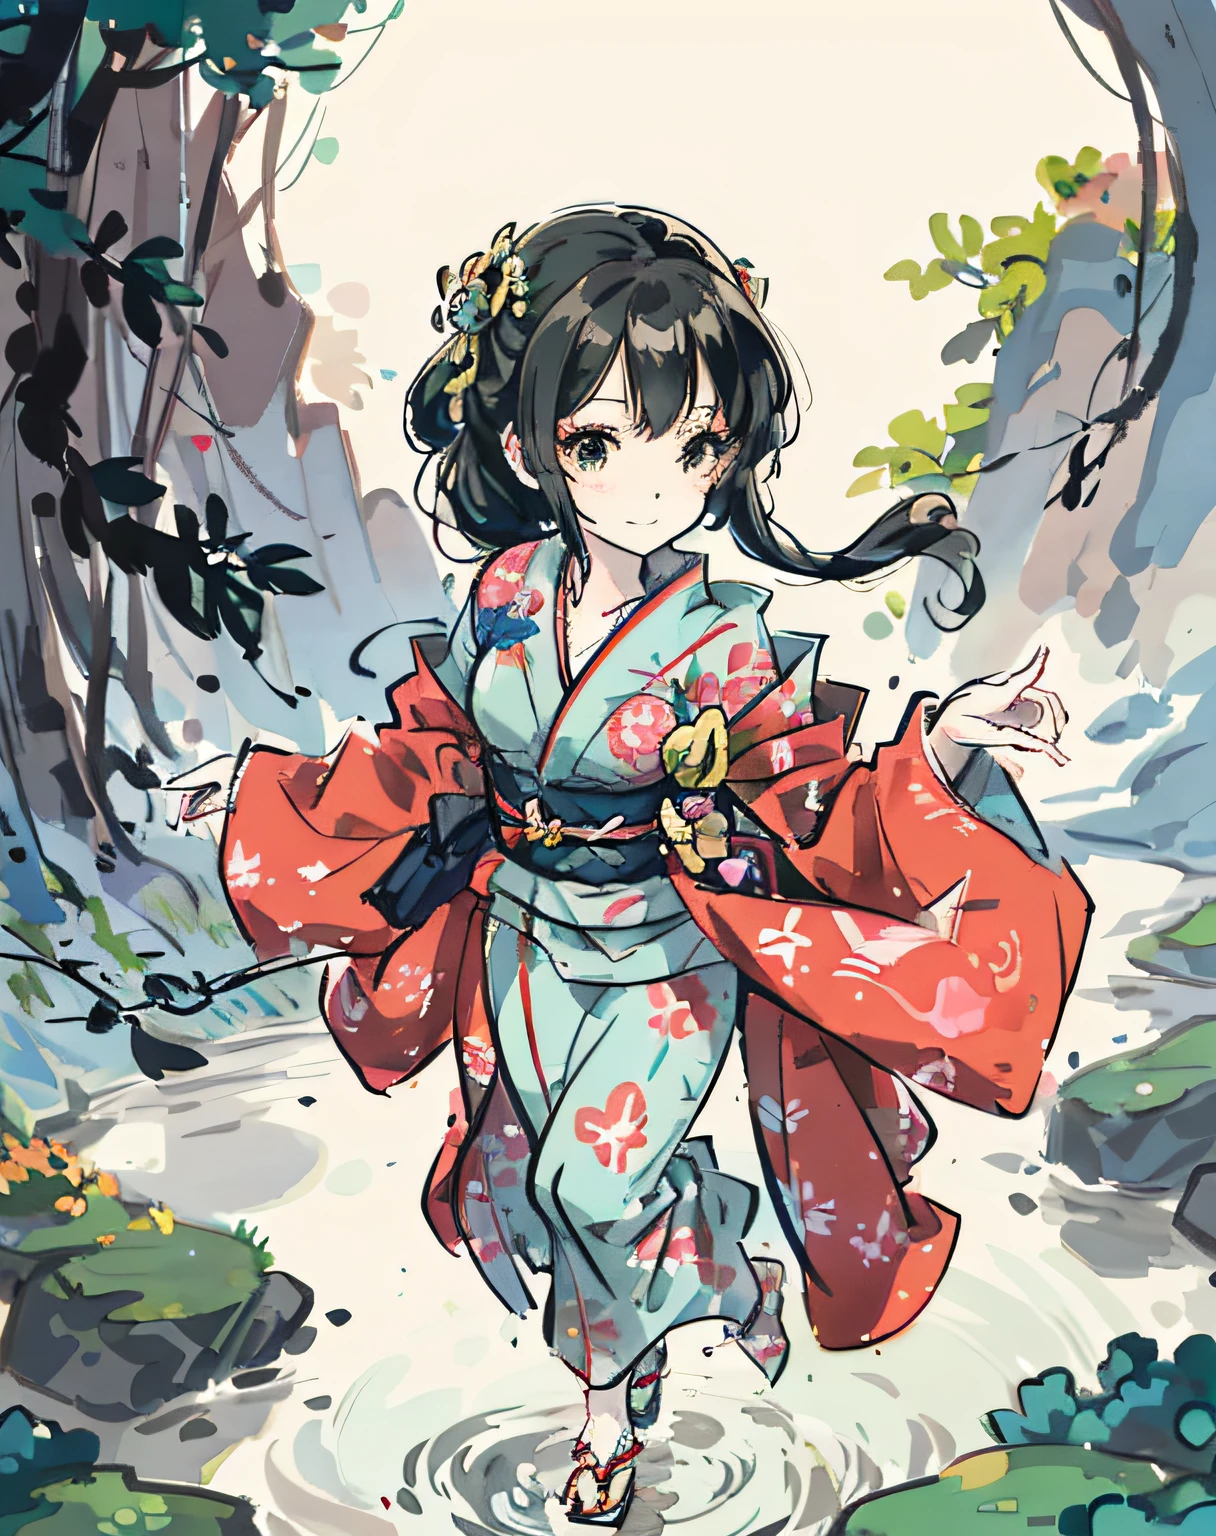 Close-up of a person walking in water in a kimono, Gouviz style artwork, Beautiful anime artwork, Beautiful artwork illustration, Anime illustration, Kavasi, Anime visual of cute girl, Guvitz, Digital anime illustration, Cute digital painting, Anime fantasy illustration, Beautiful anime art, Beautiful character painting